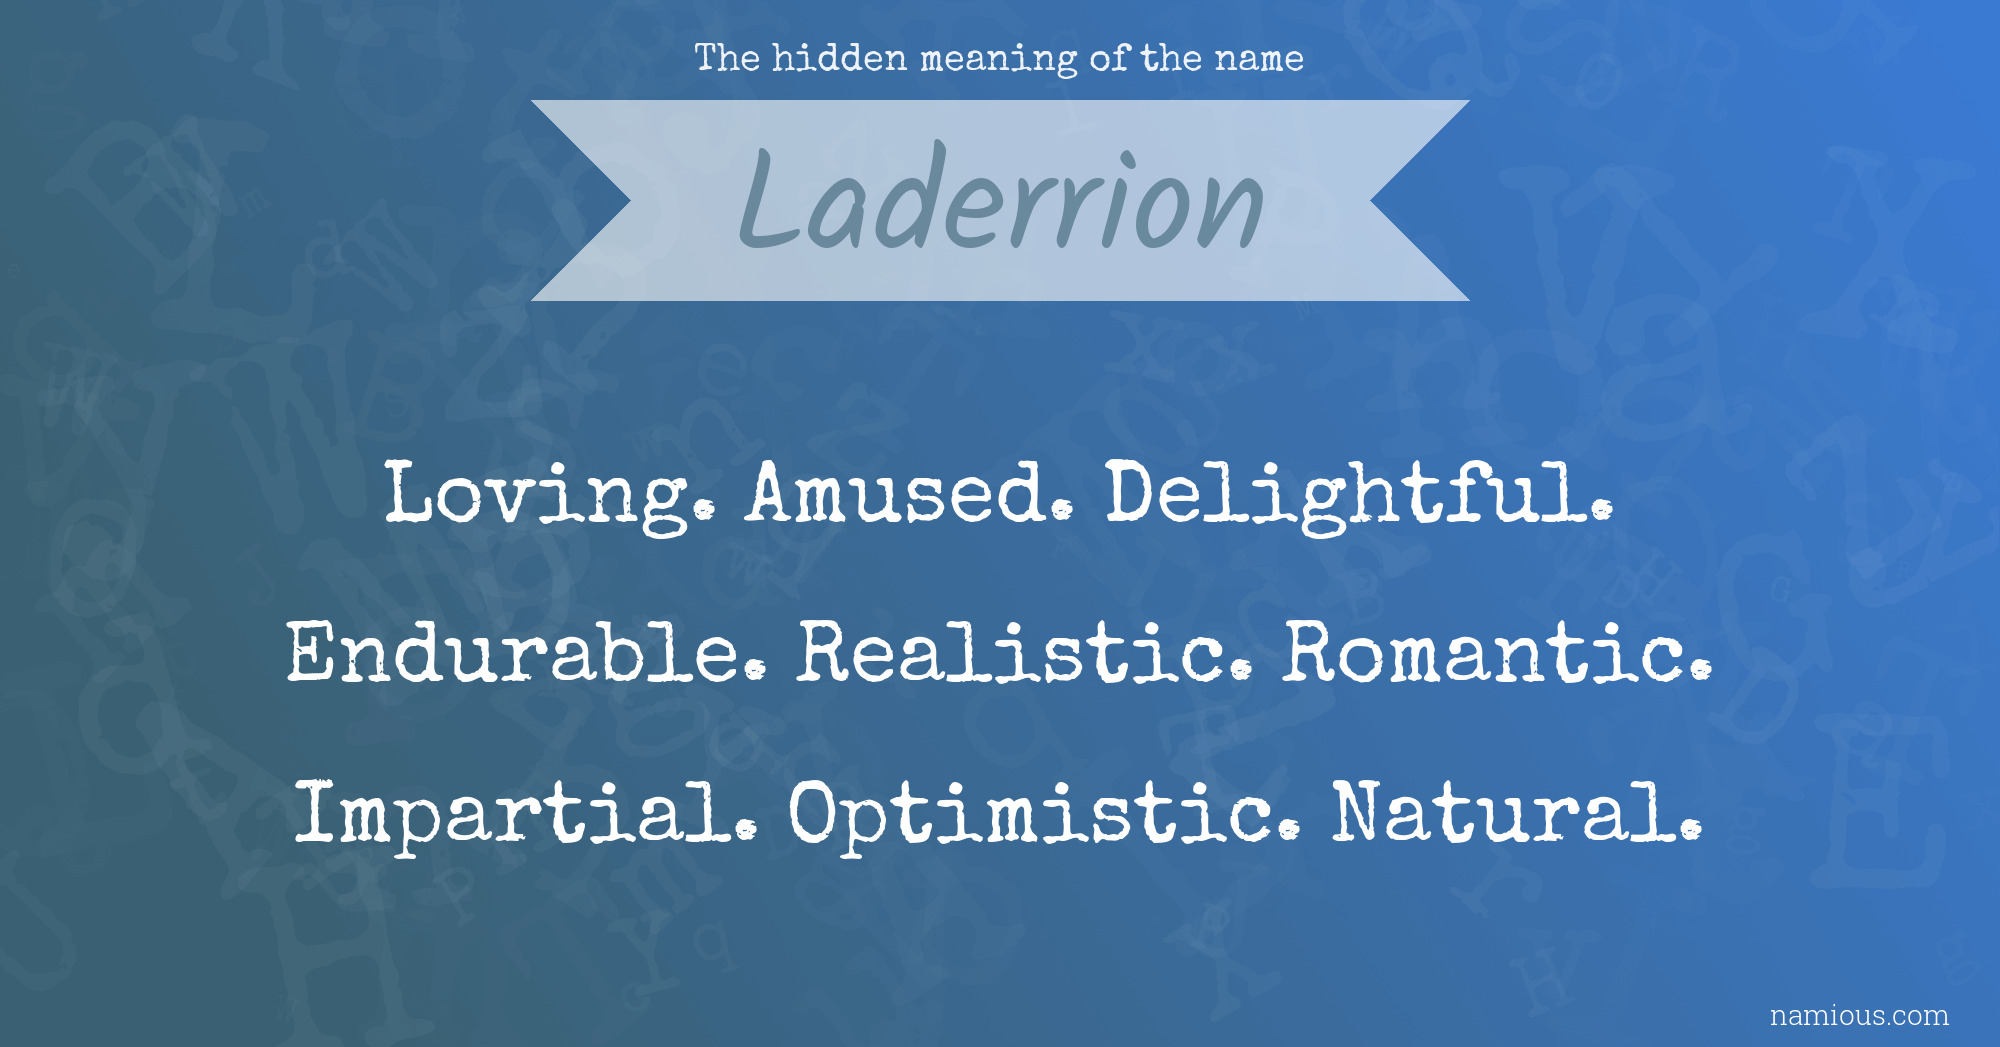 The hidden meaning of the name Laderrion